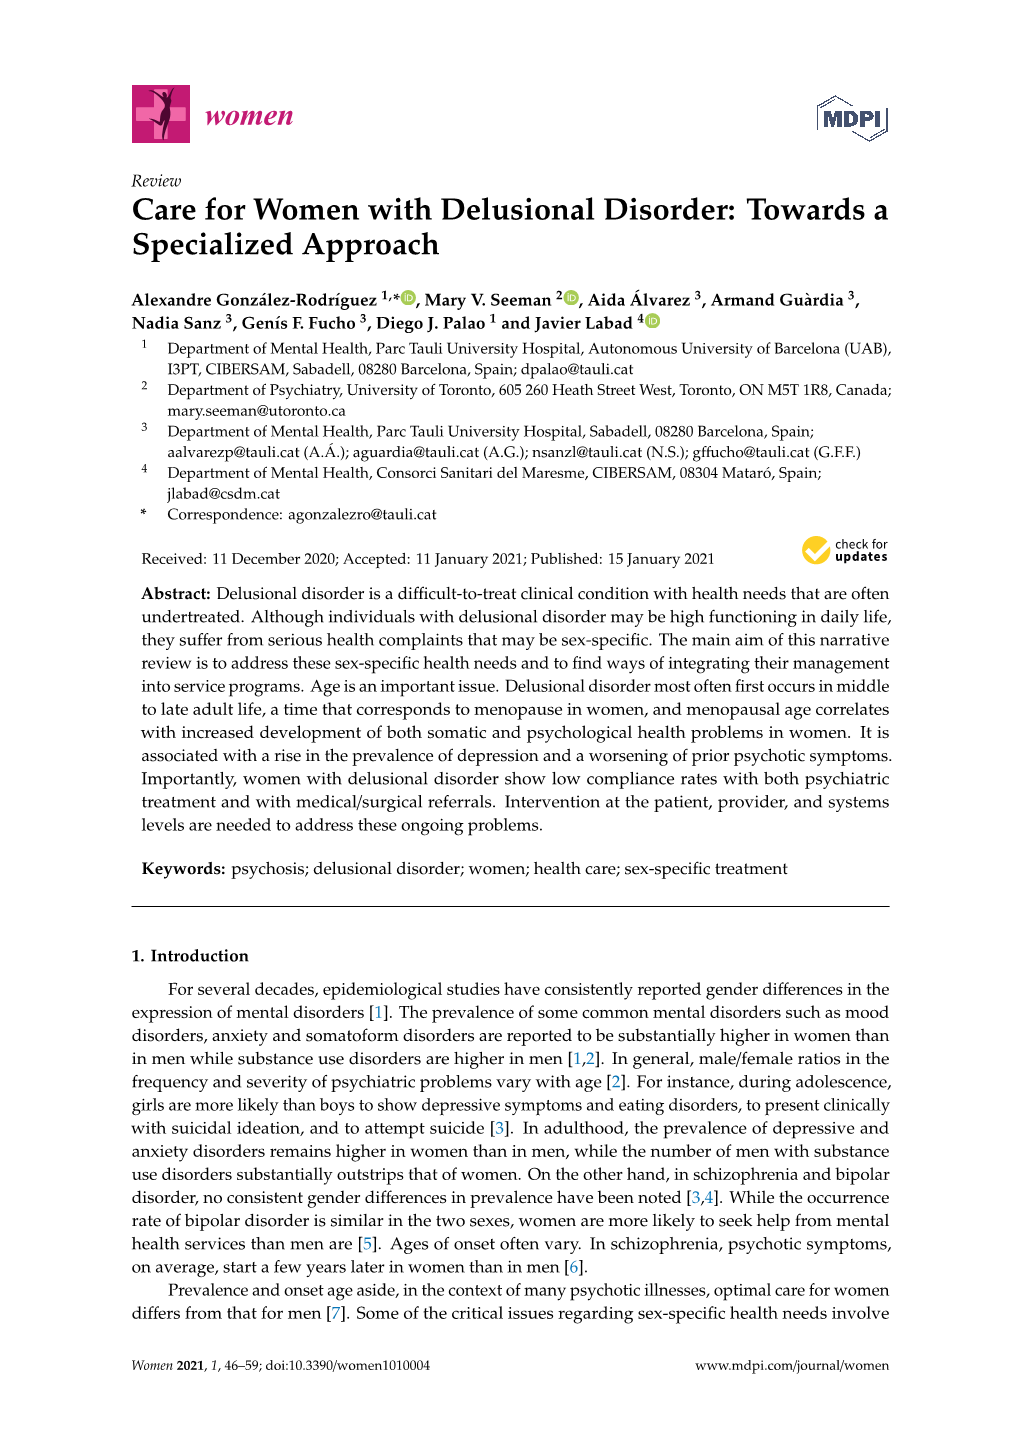 Care for Women with Delusional Disorder: Towards a Specialized Approach